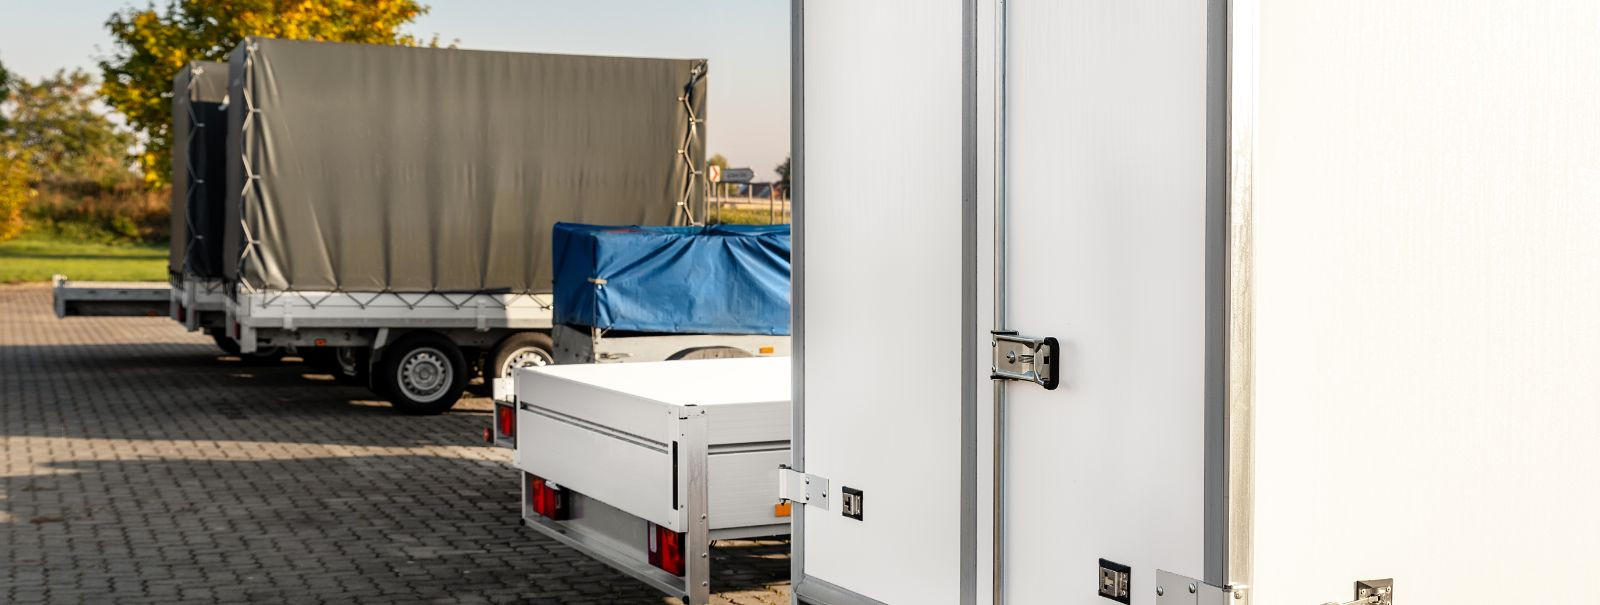 Towing a trailer can be a daunting task for the uninitiated. It involves understanding the dynamics of a larger, heavier vehicle behind your car or truck. This 